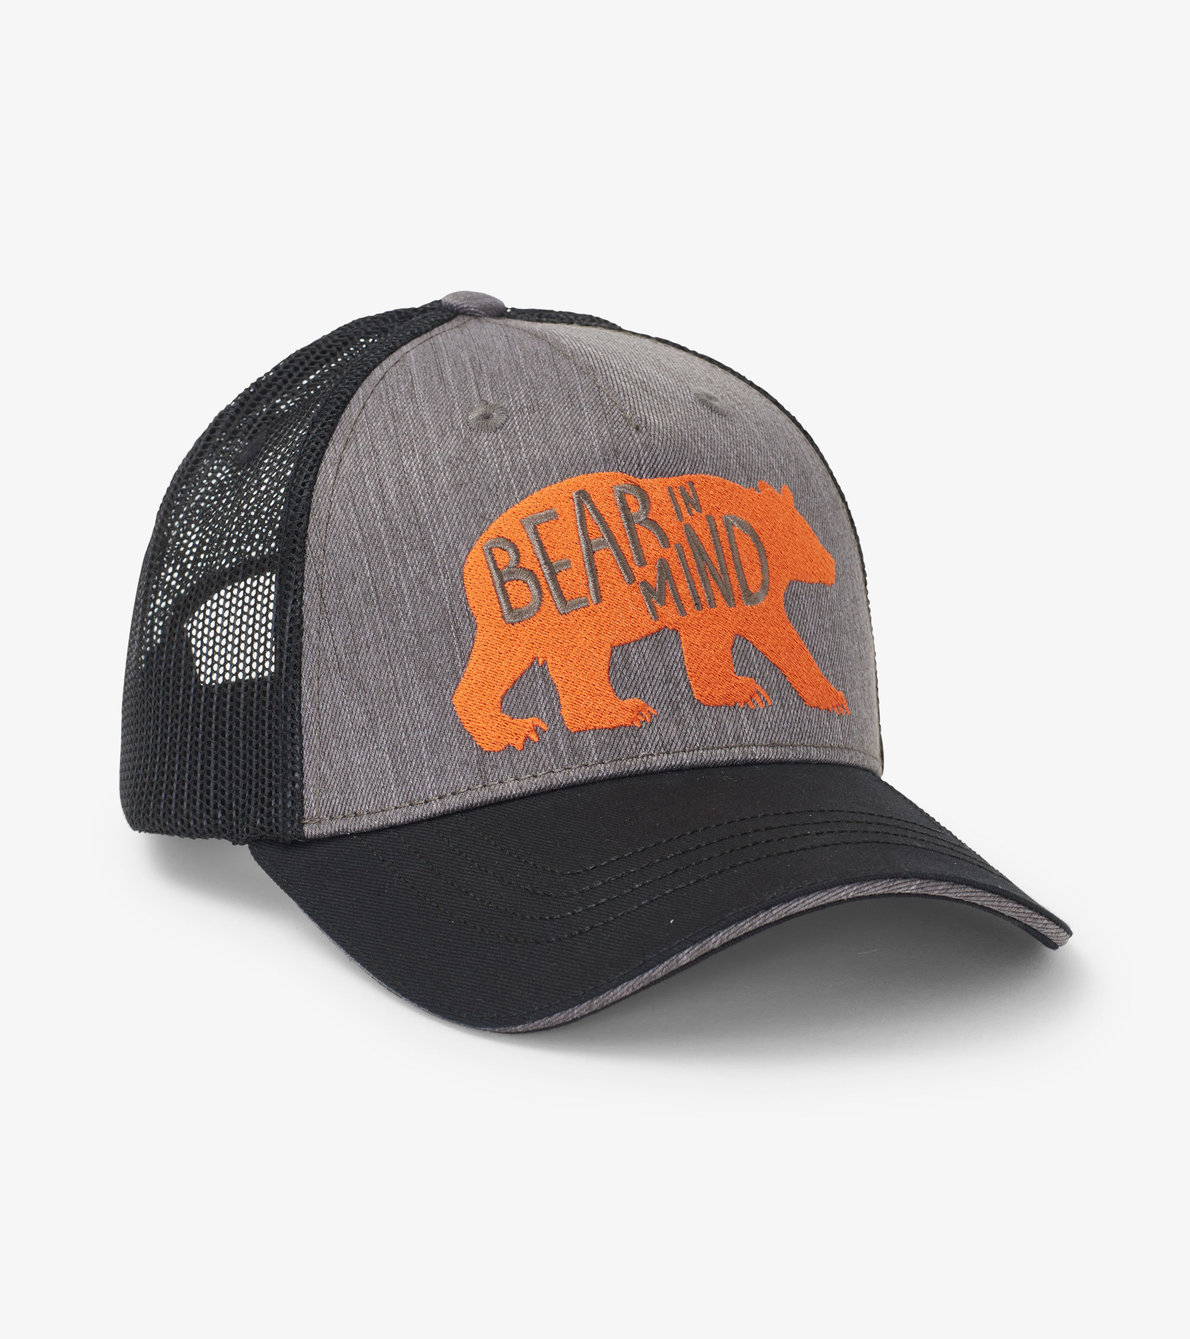 View larger image of Bear In Mind Adult Baseball Cap